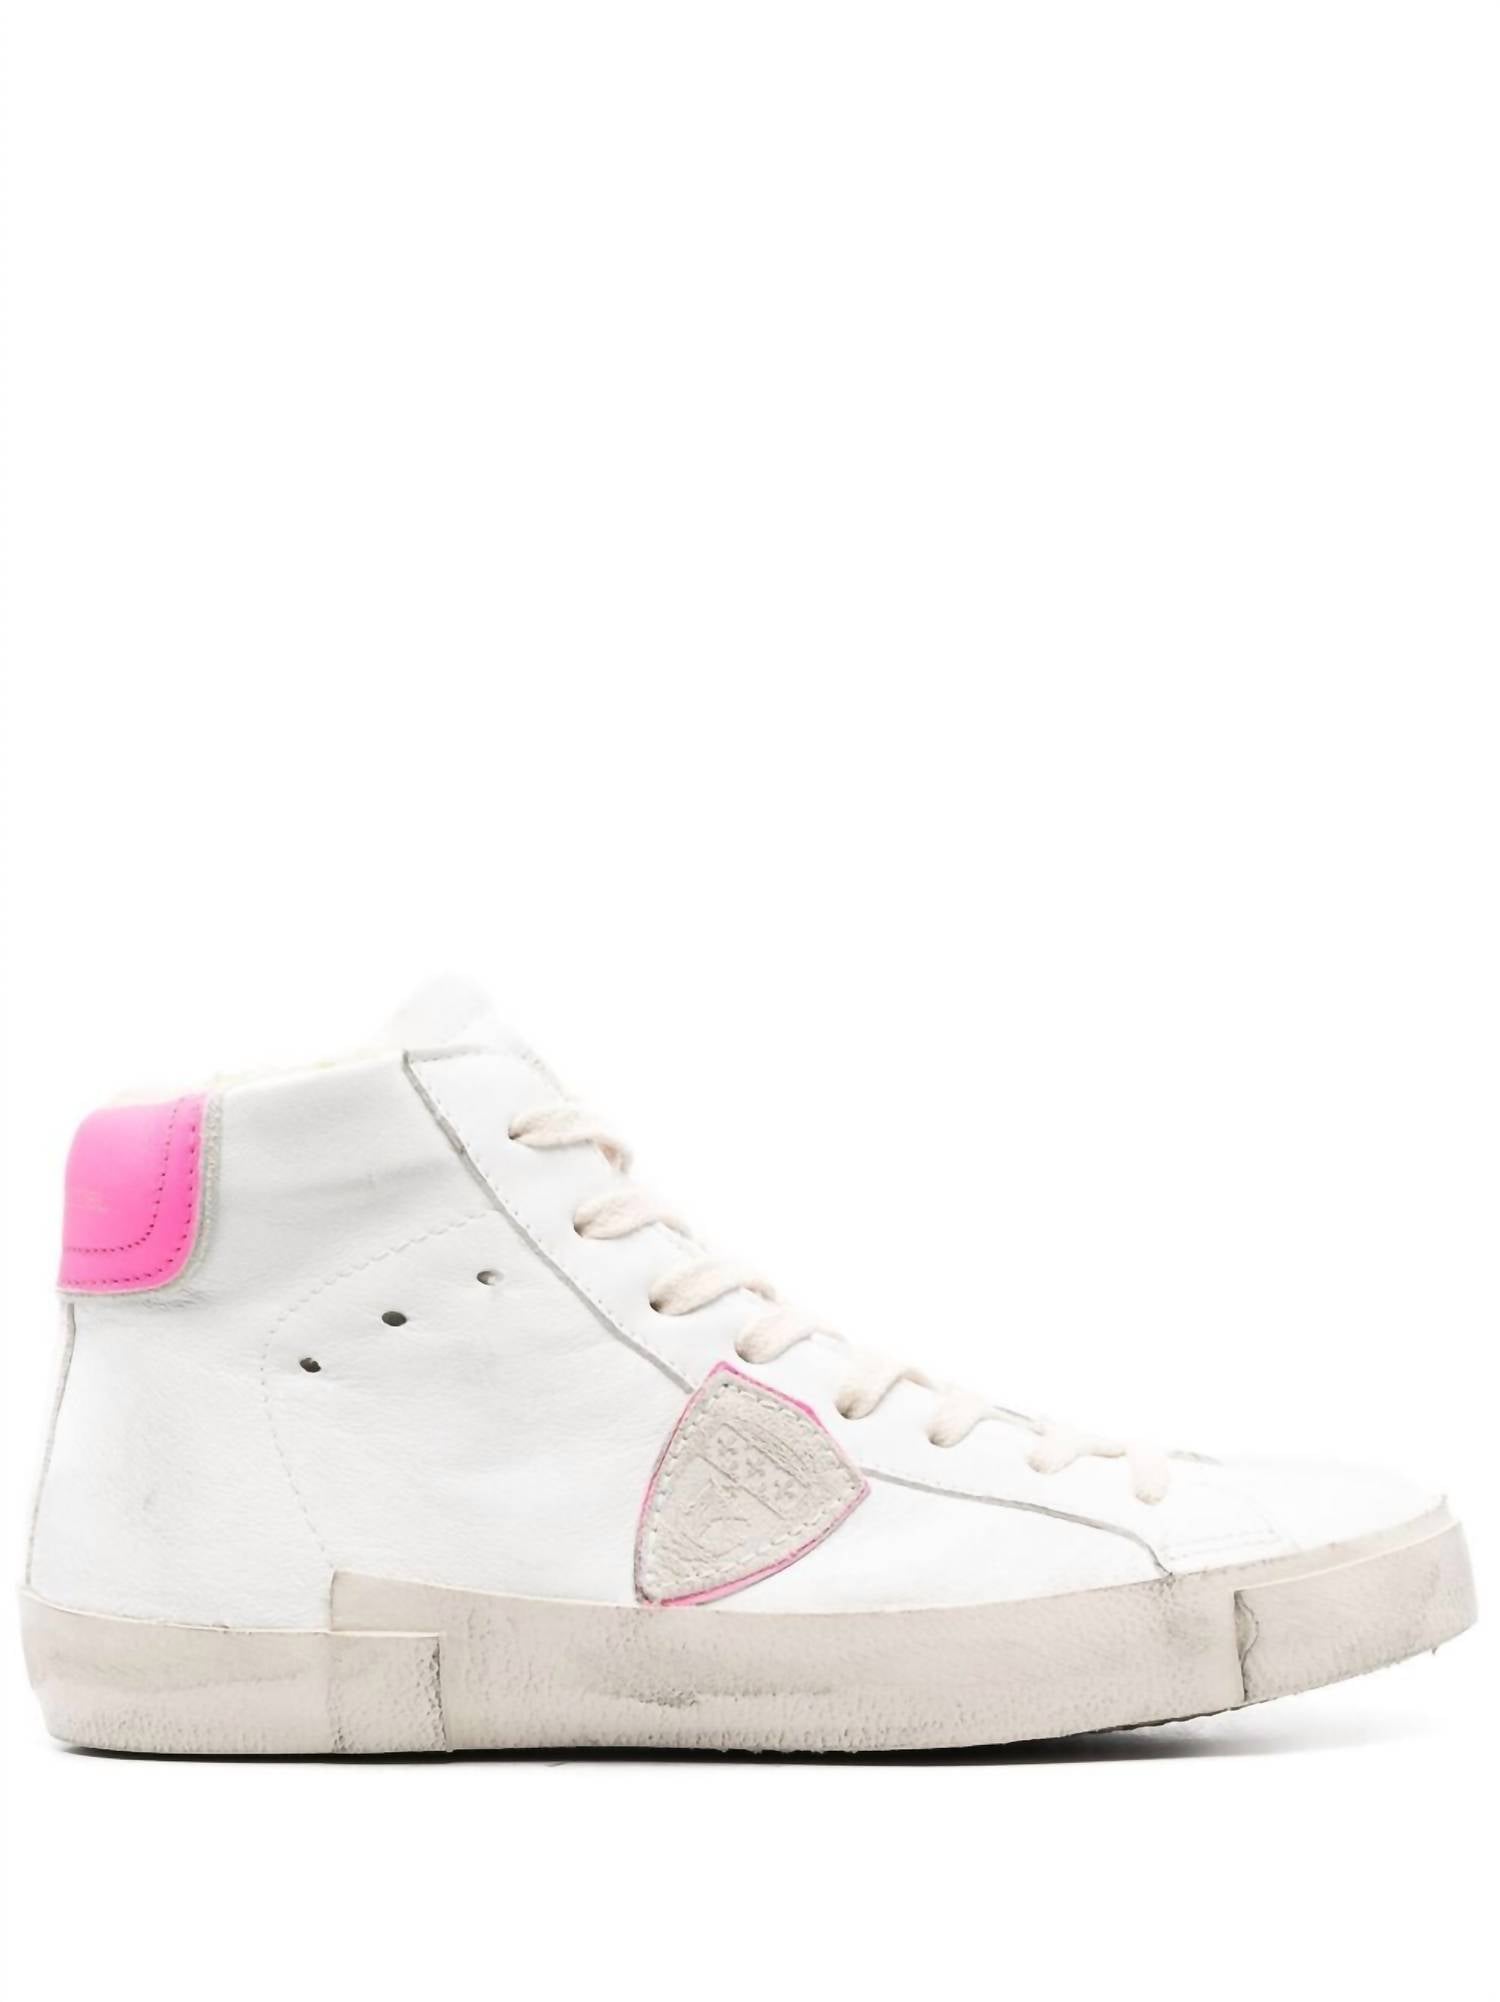 Philippe Model Logo Patch High Sneaker In White/pink In Multi